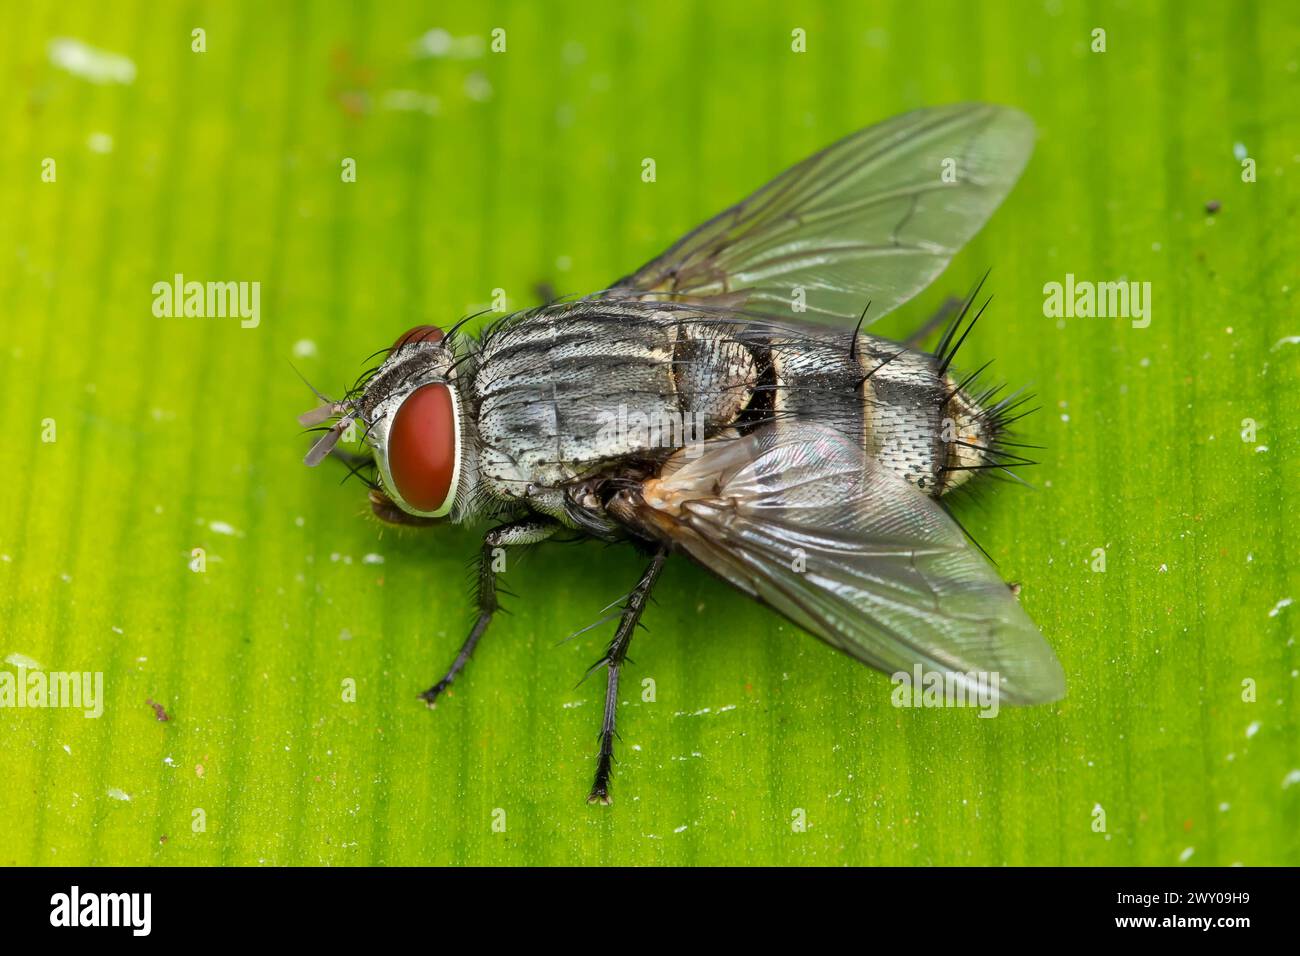 Close-up of a Sarcophaga bercaea flesh fly on a vibrant green leaf Stock Photo